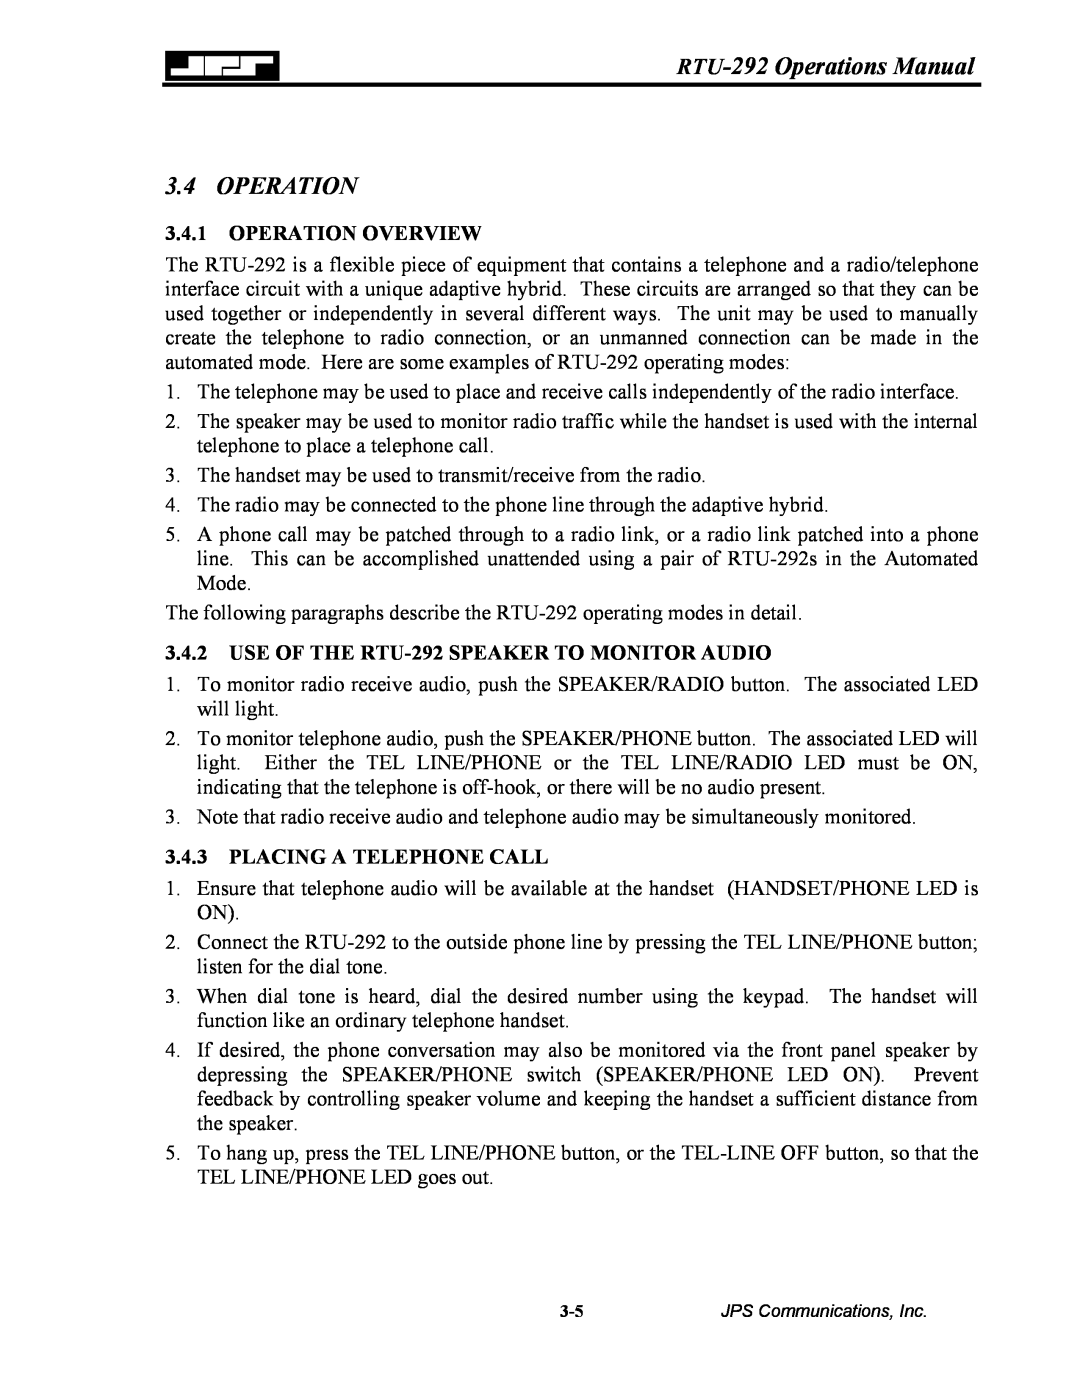 Nortel Networks RTU-292 Operations Manual, Operation Overview, USE OF THE RTU-292 SPEAKER TO MONITOR AUDIO 